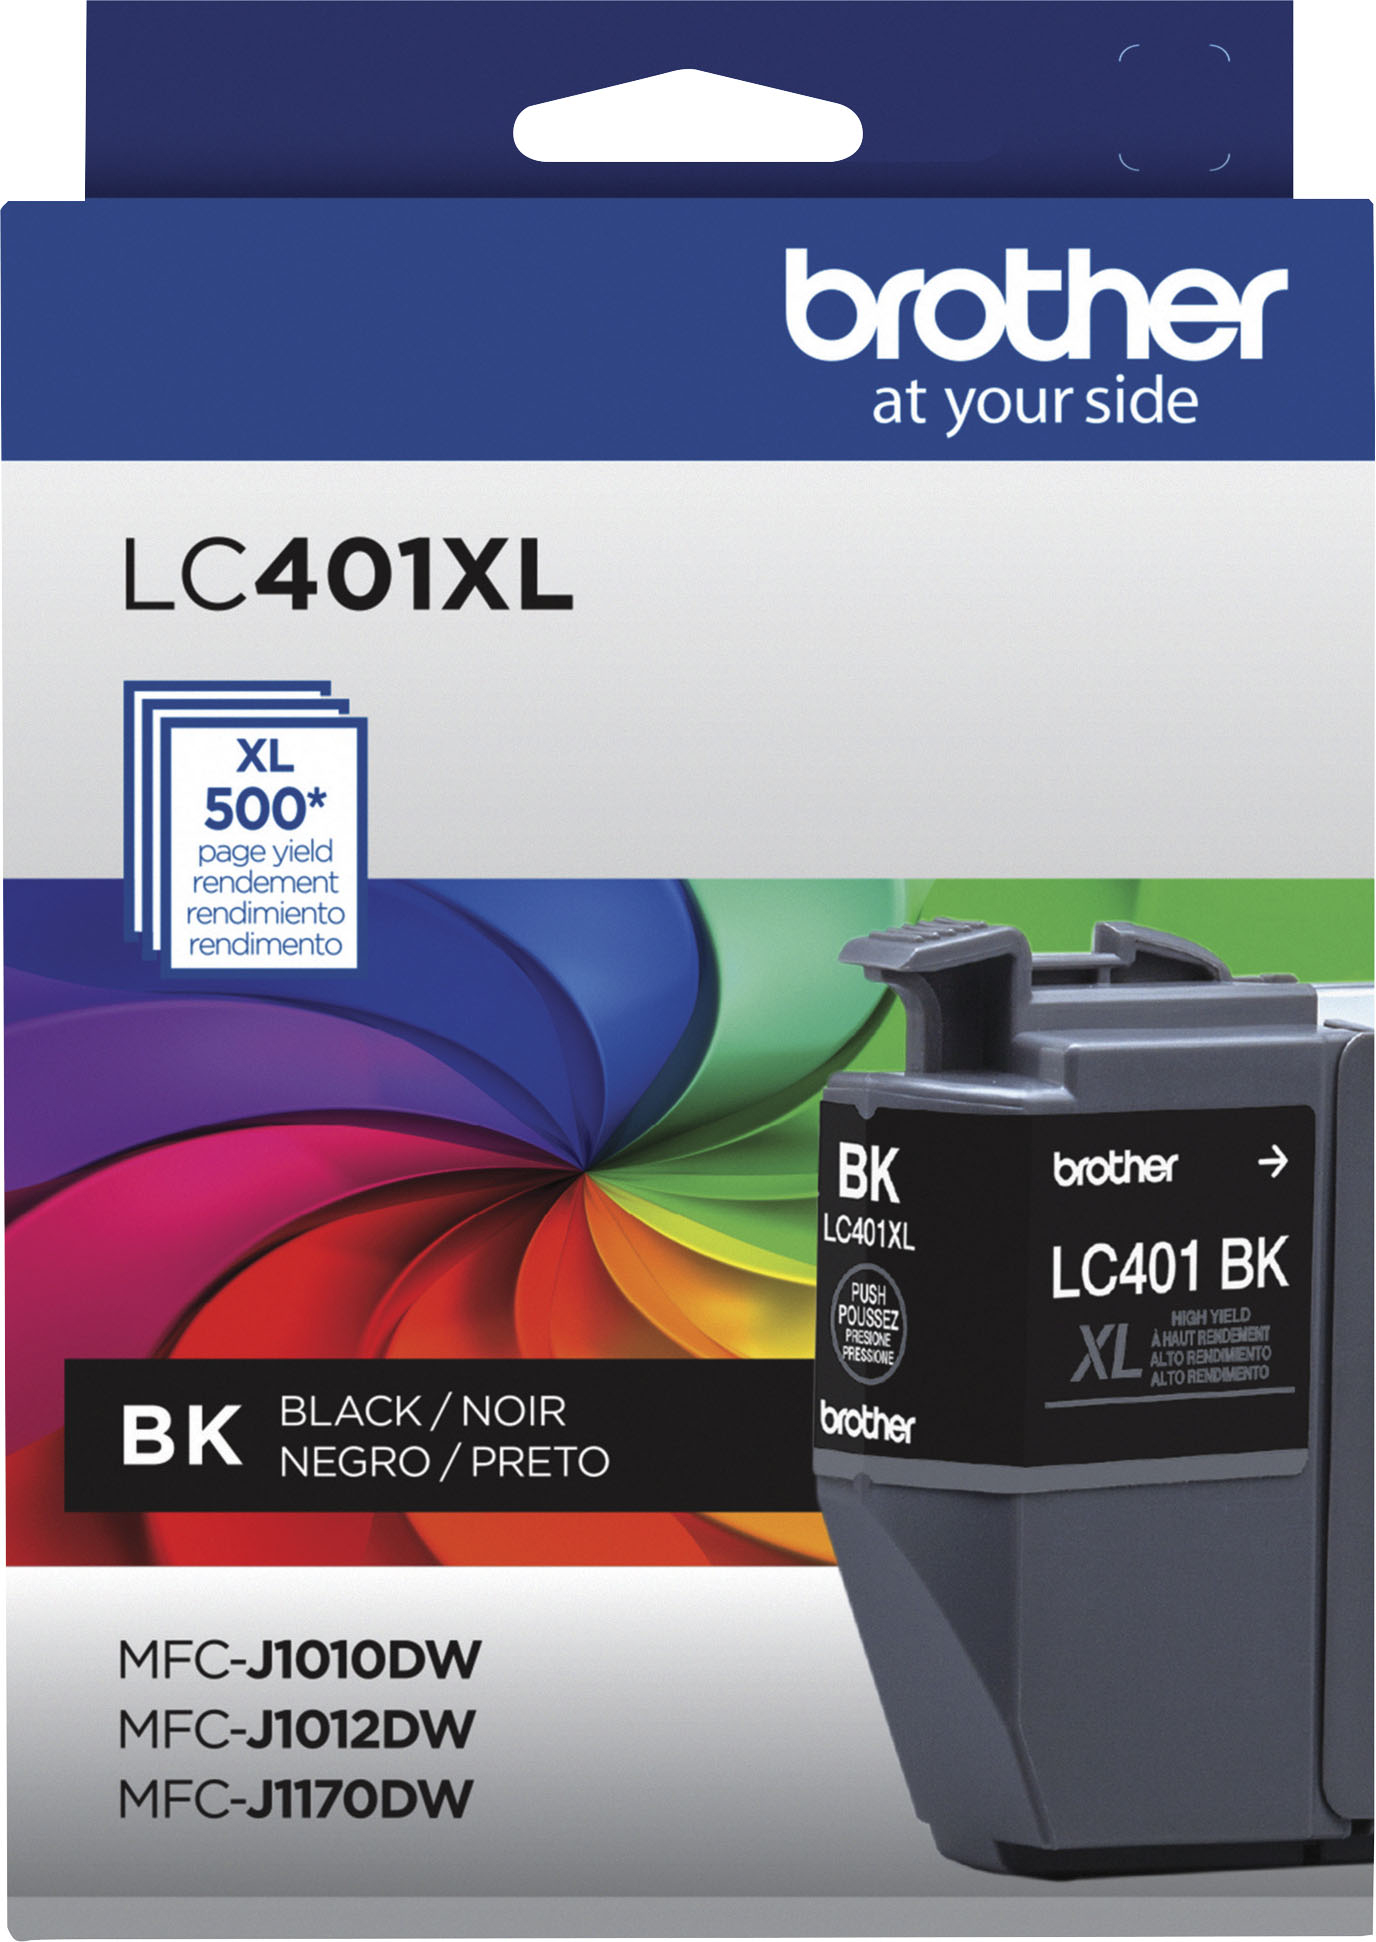 Brother MFC-J1010DW Wireless Color All-in-One Refresh Subscription Eligible  Inkjet Printer Black MFCJ1010DW - Best Buy